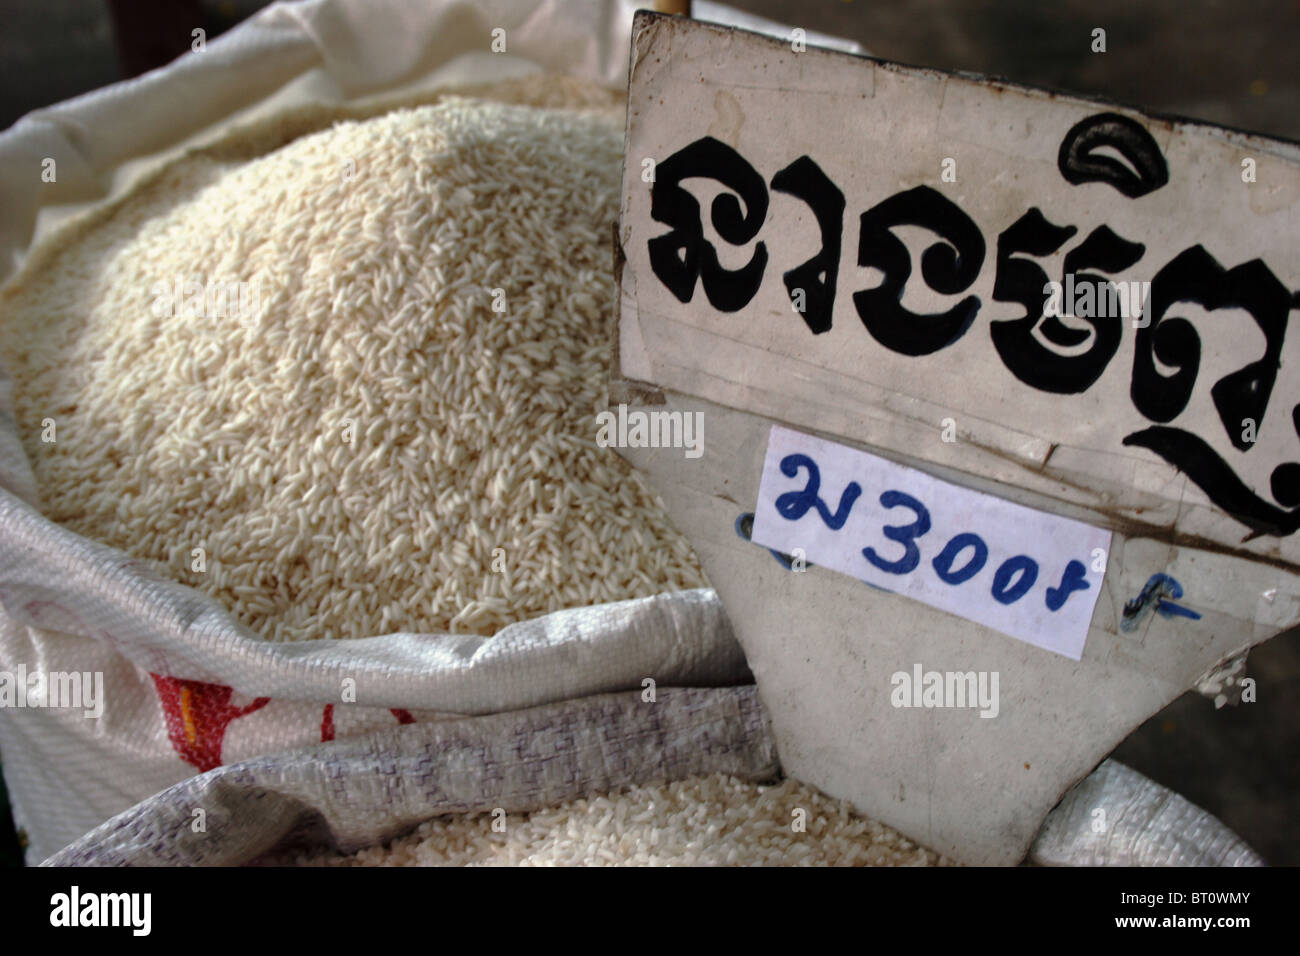 Rice priced by kilograms is ready for sale at a food distribution outlet in Phnom Penh, Cambodia. Stock Photo